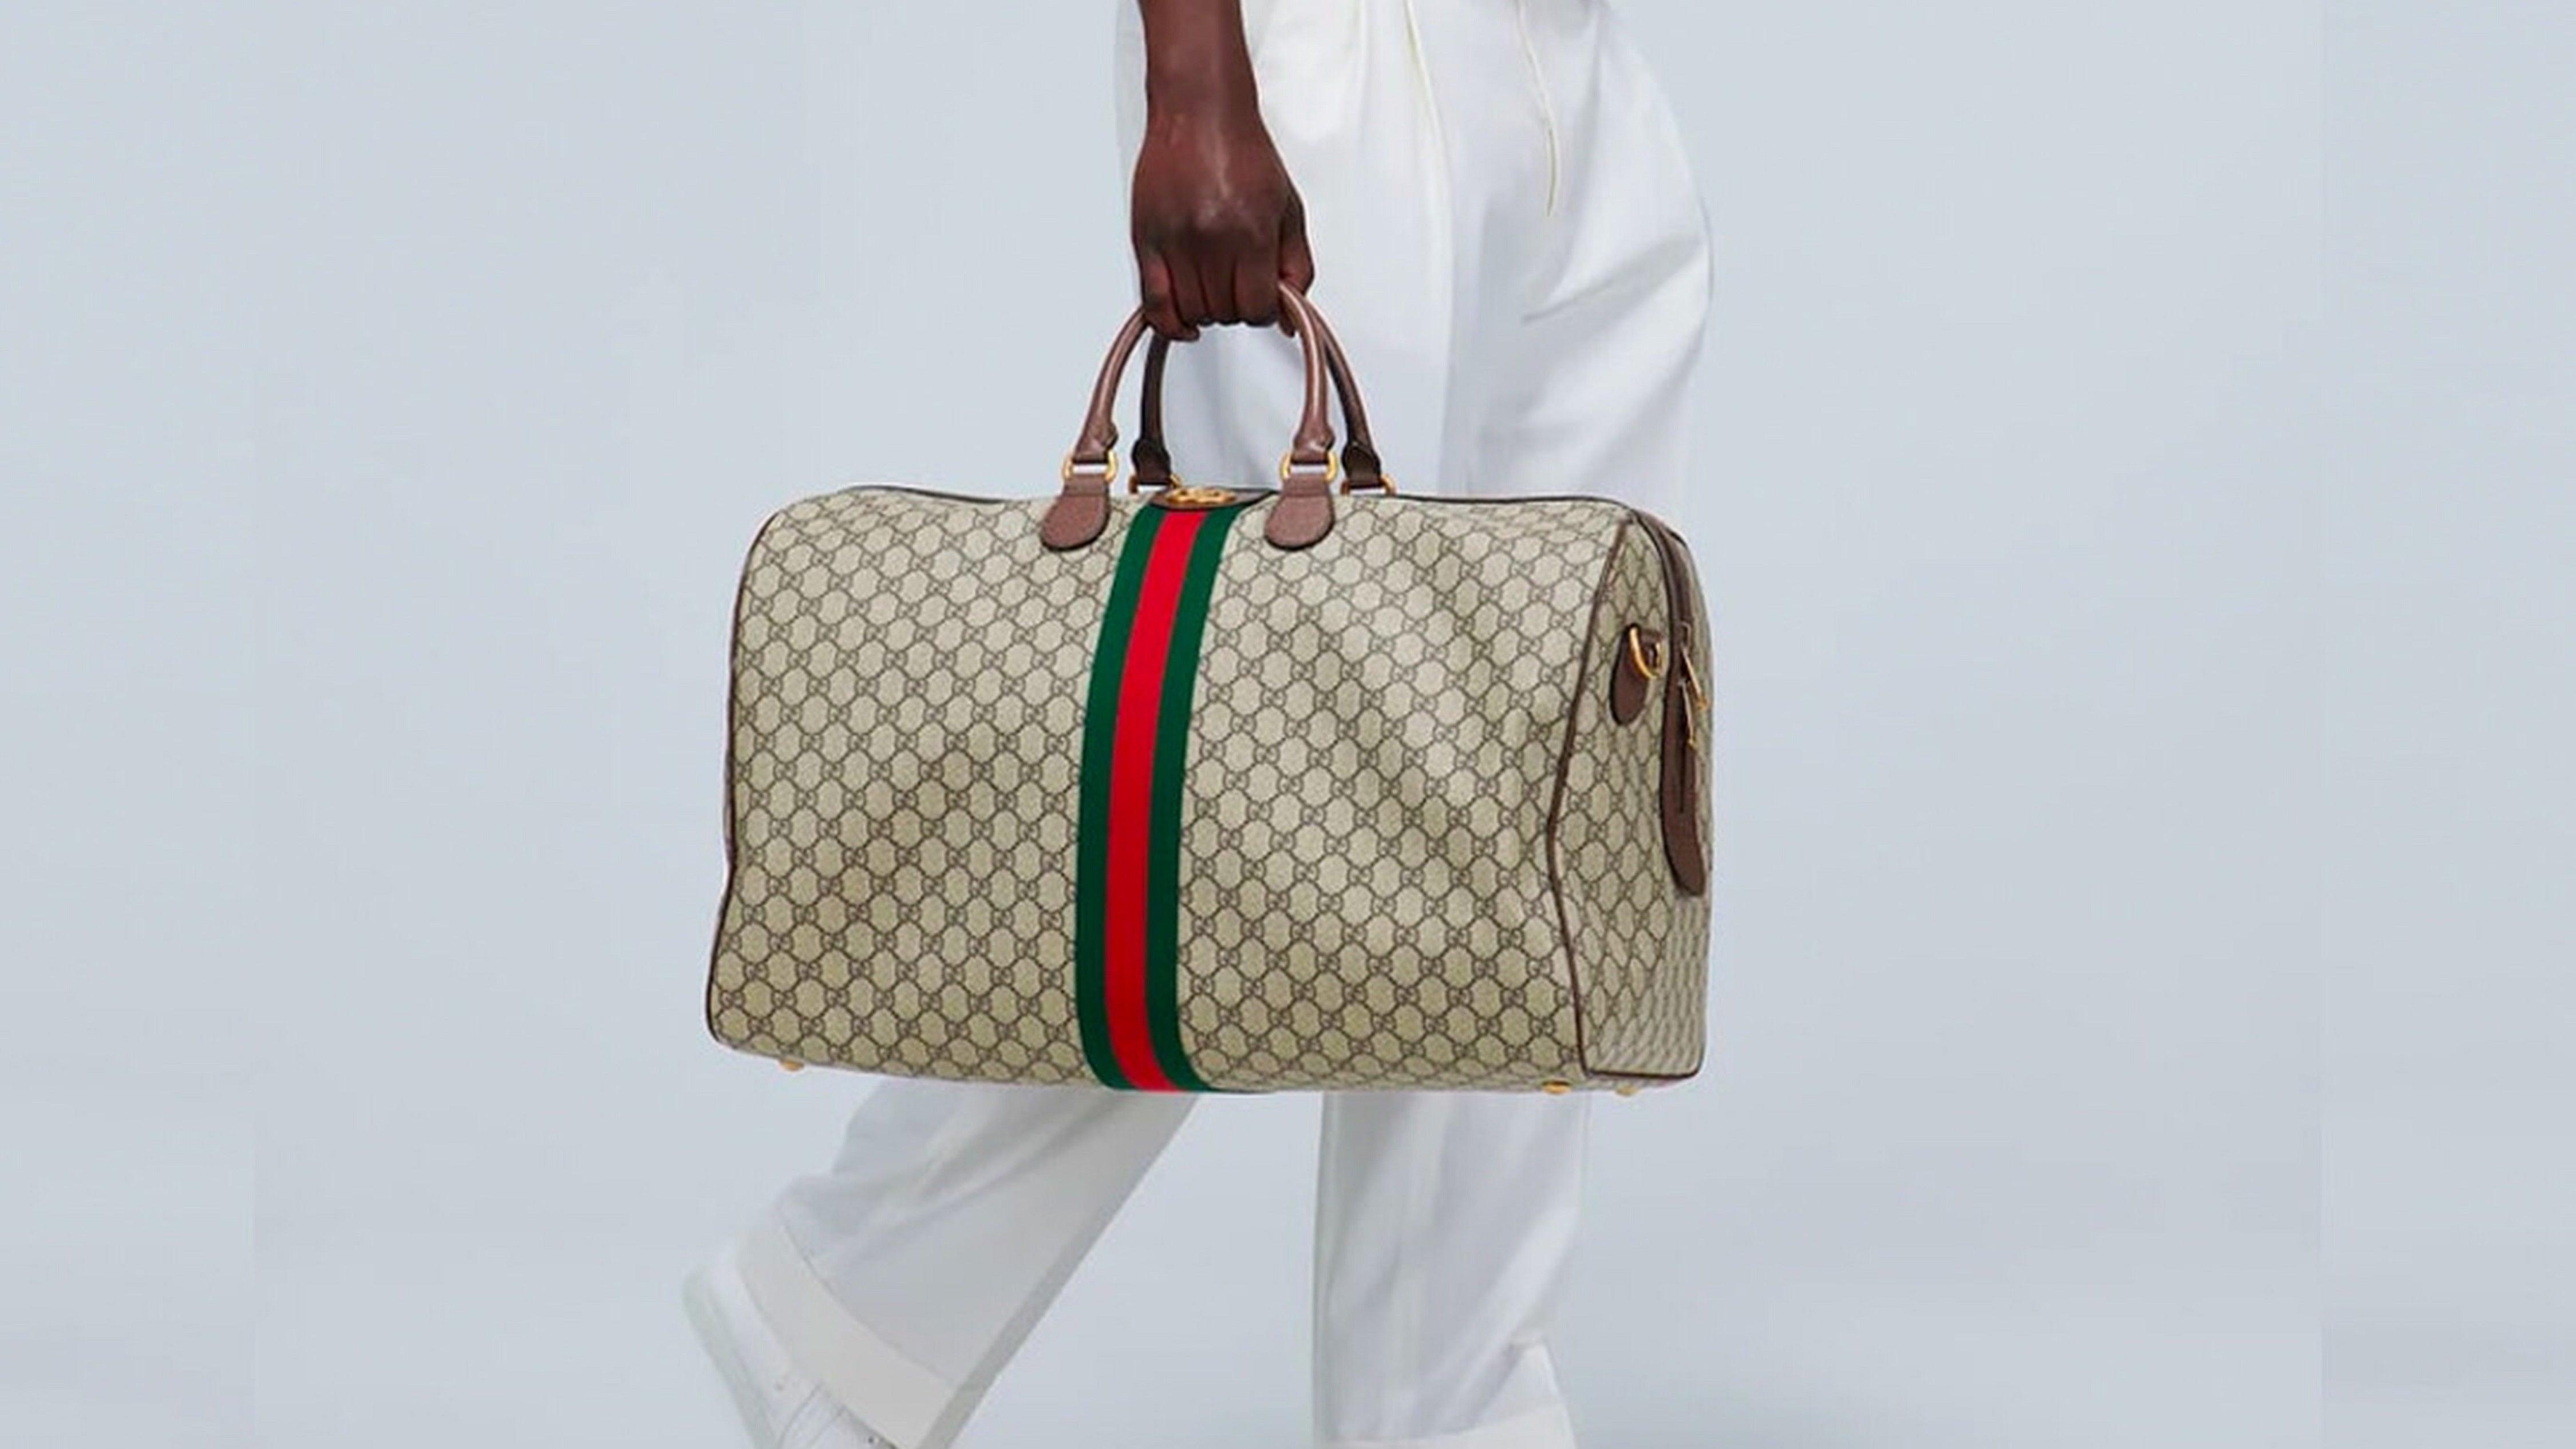 Gucci – The Height of Italian Fashion - LINVELLES.COM}